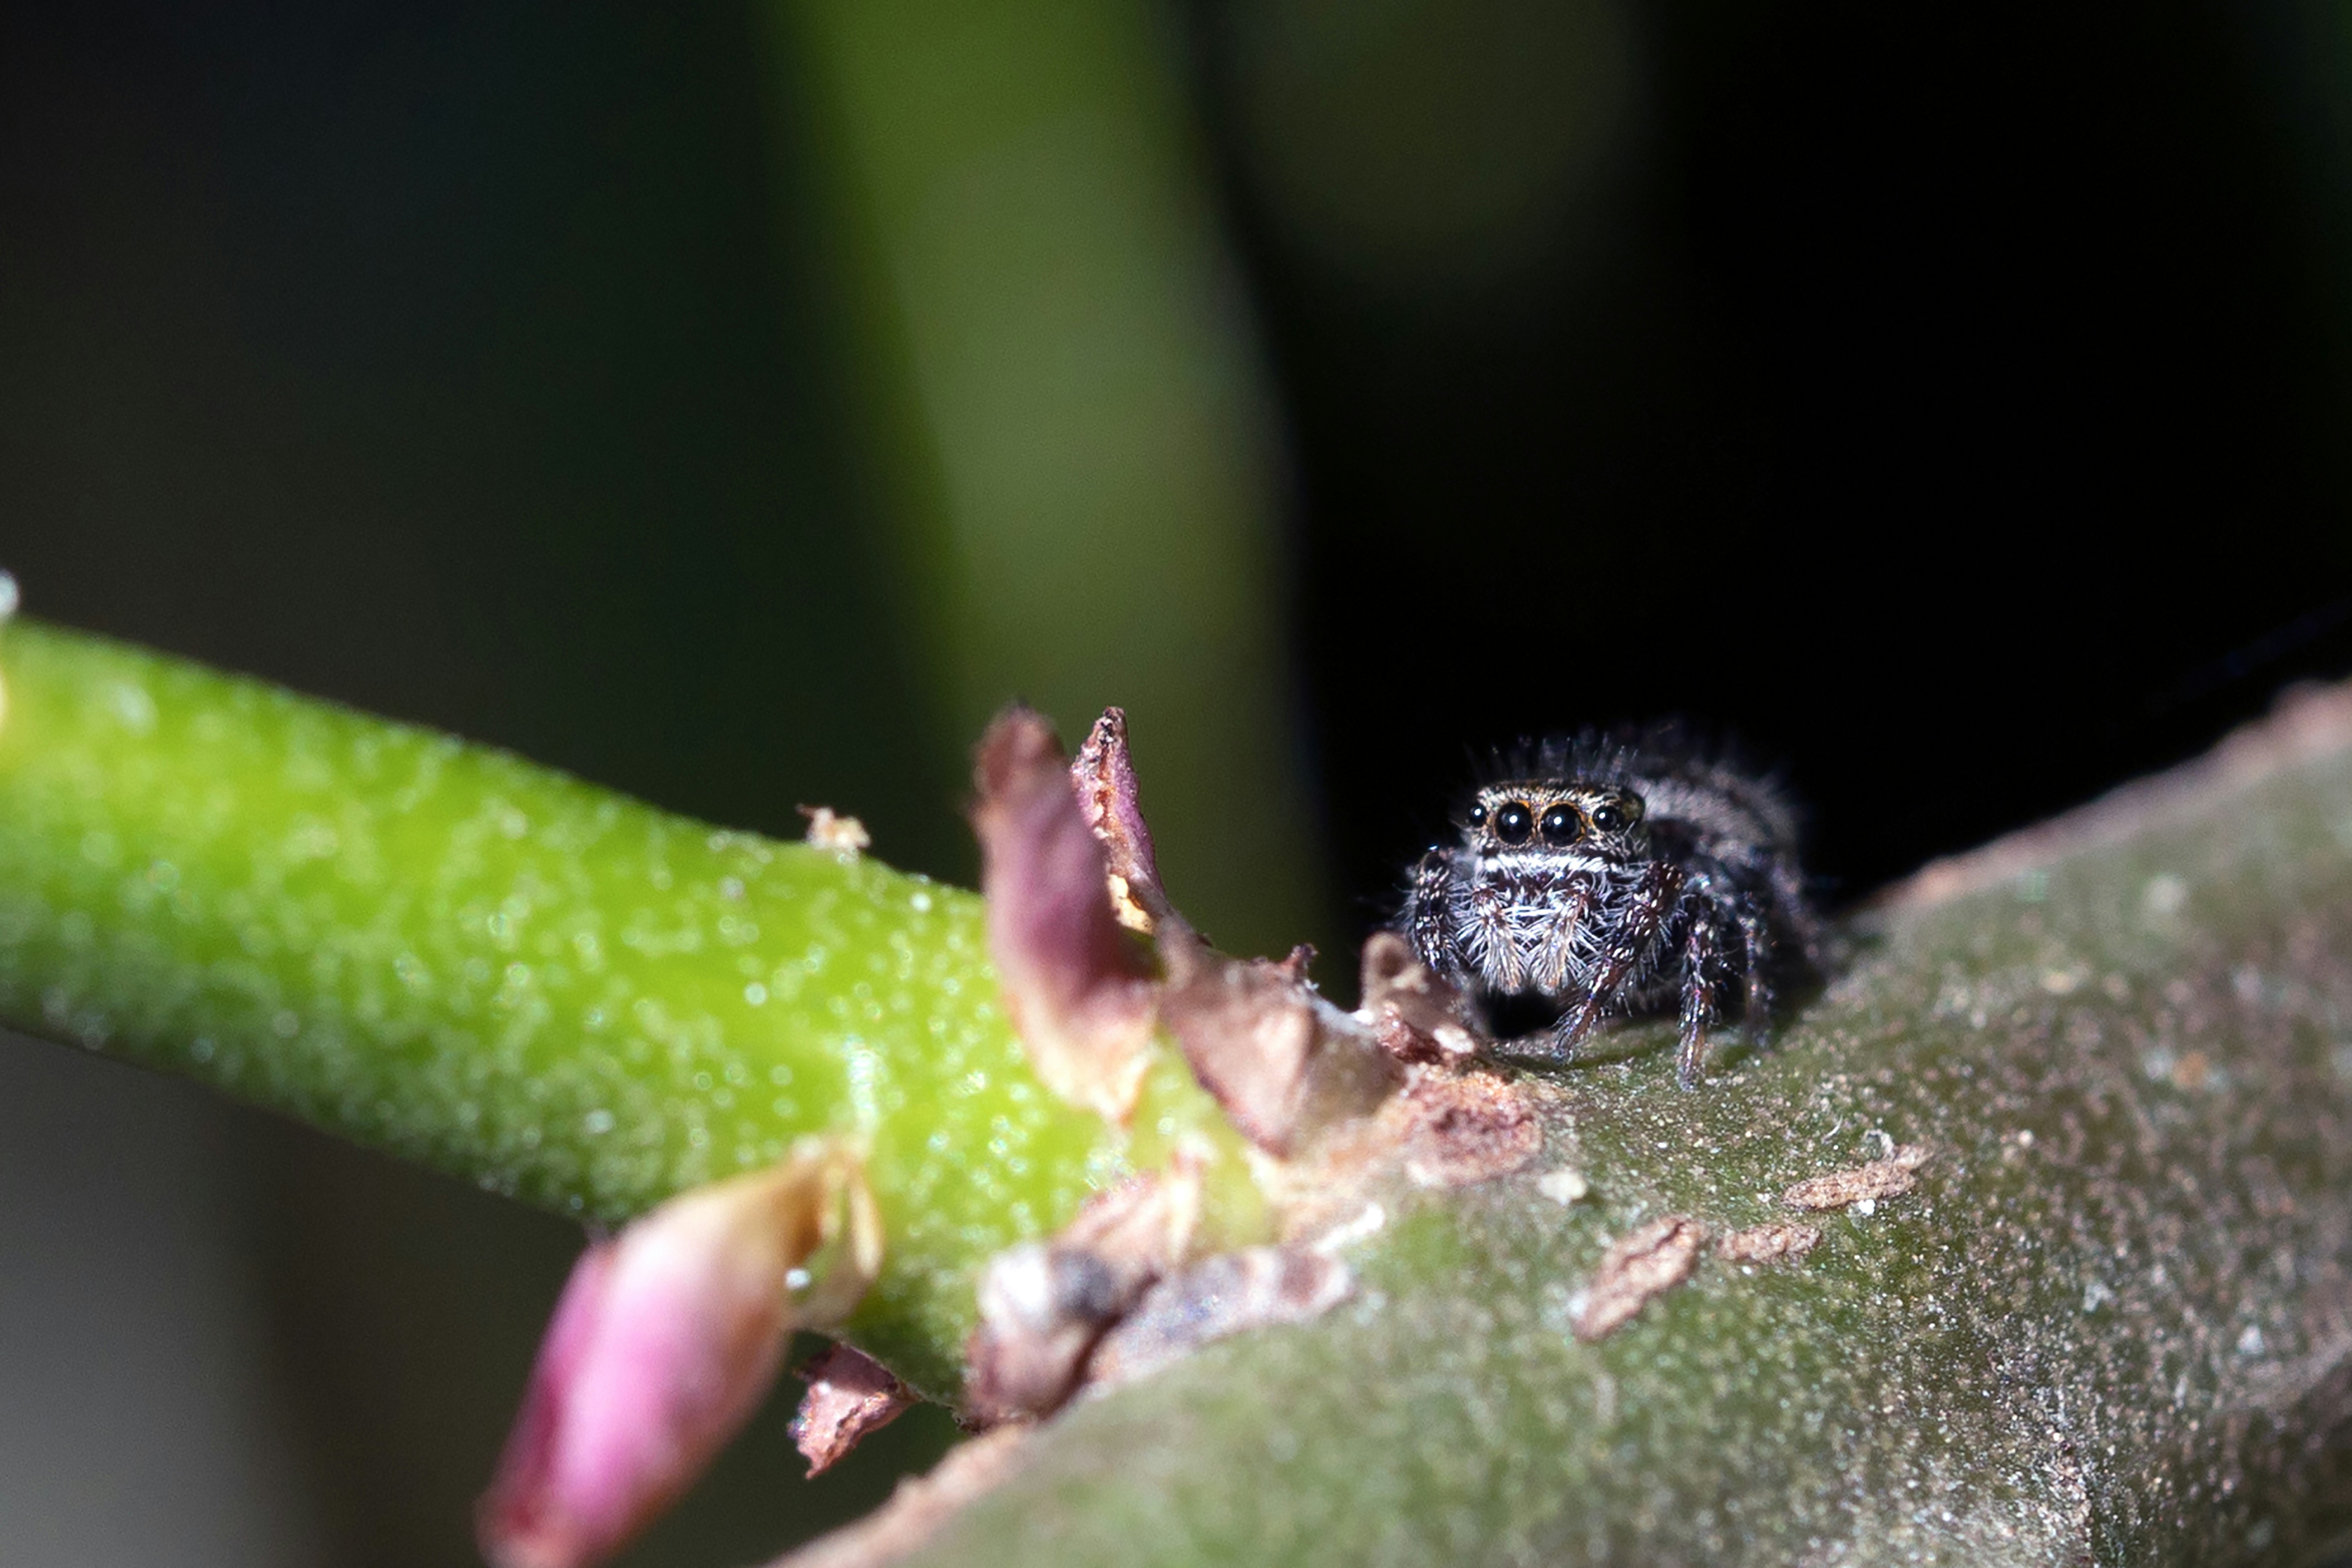 black and white spider on green leaf